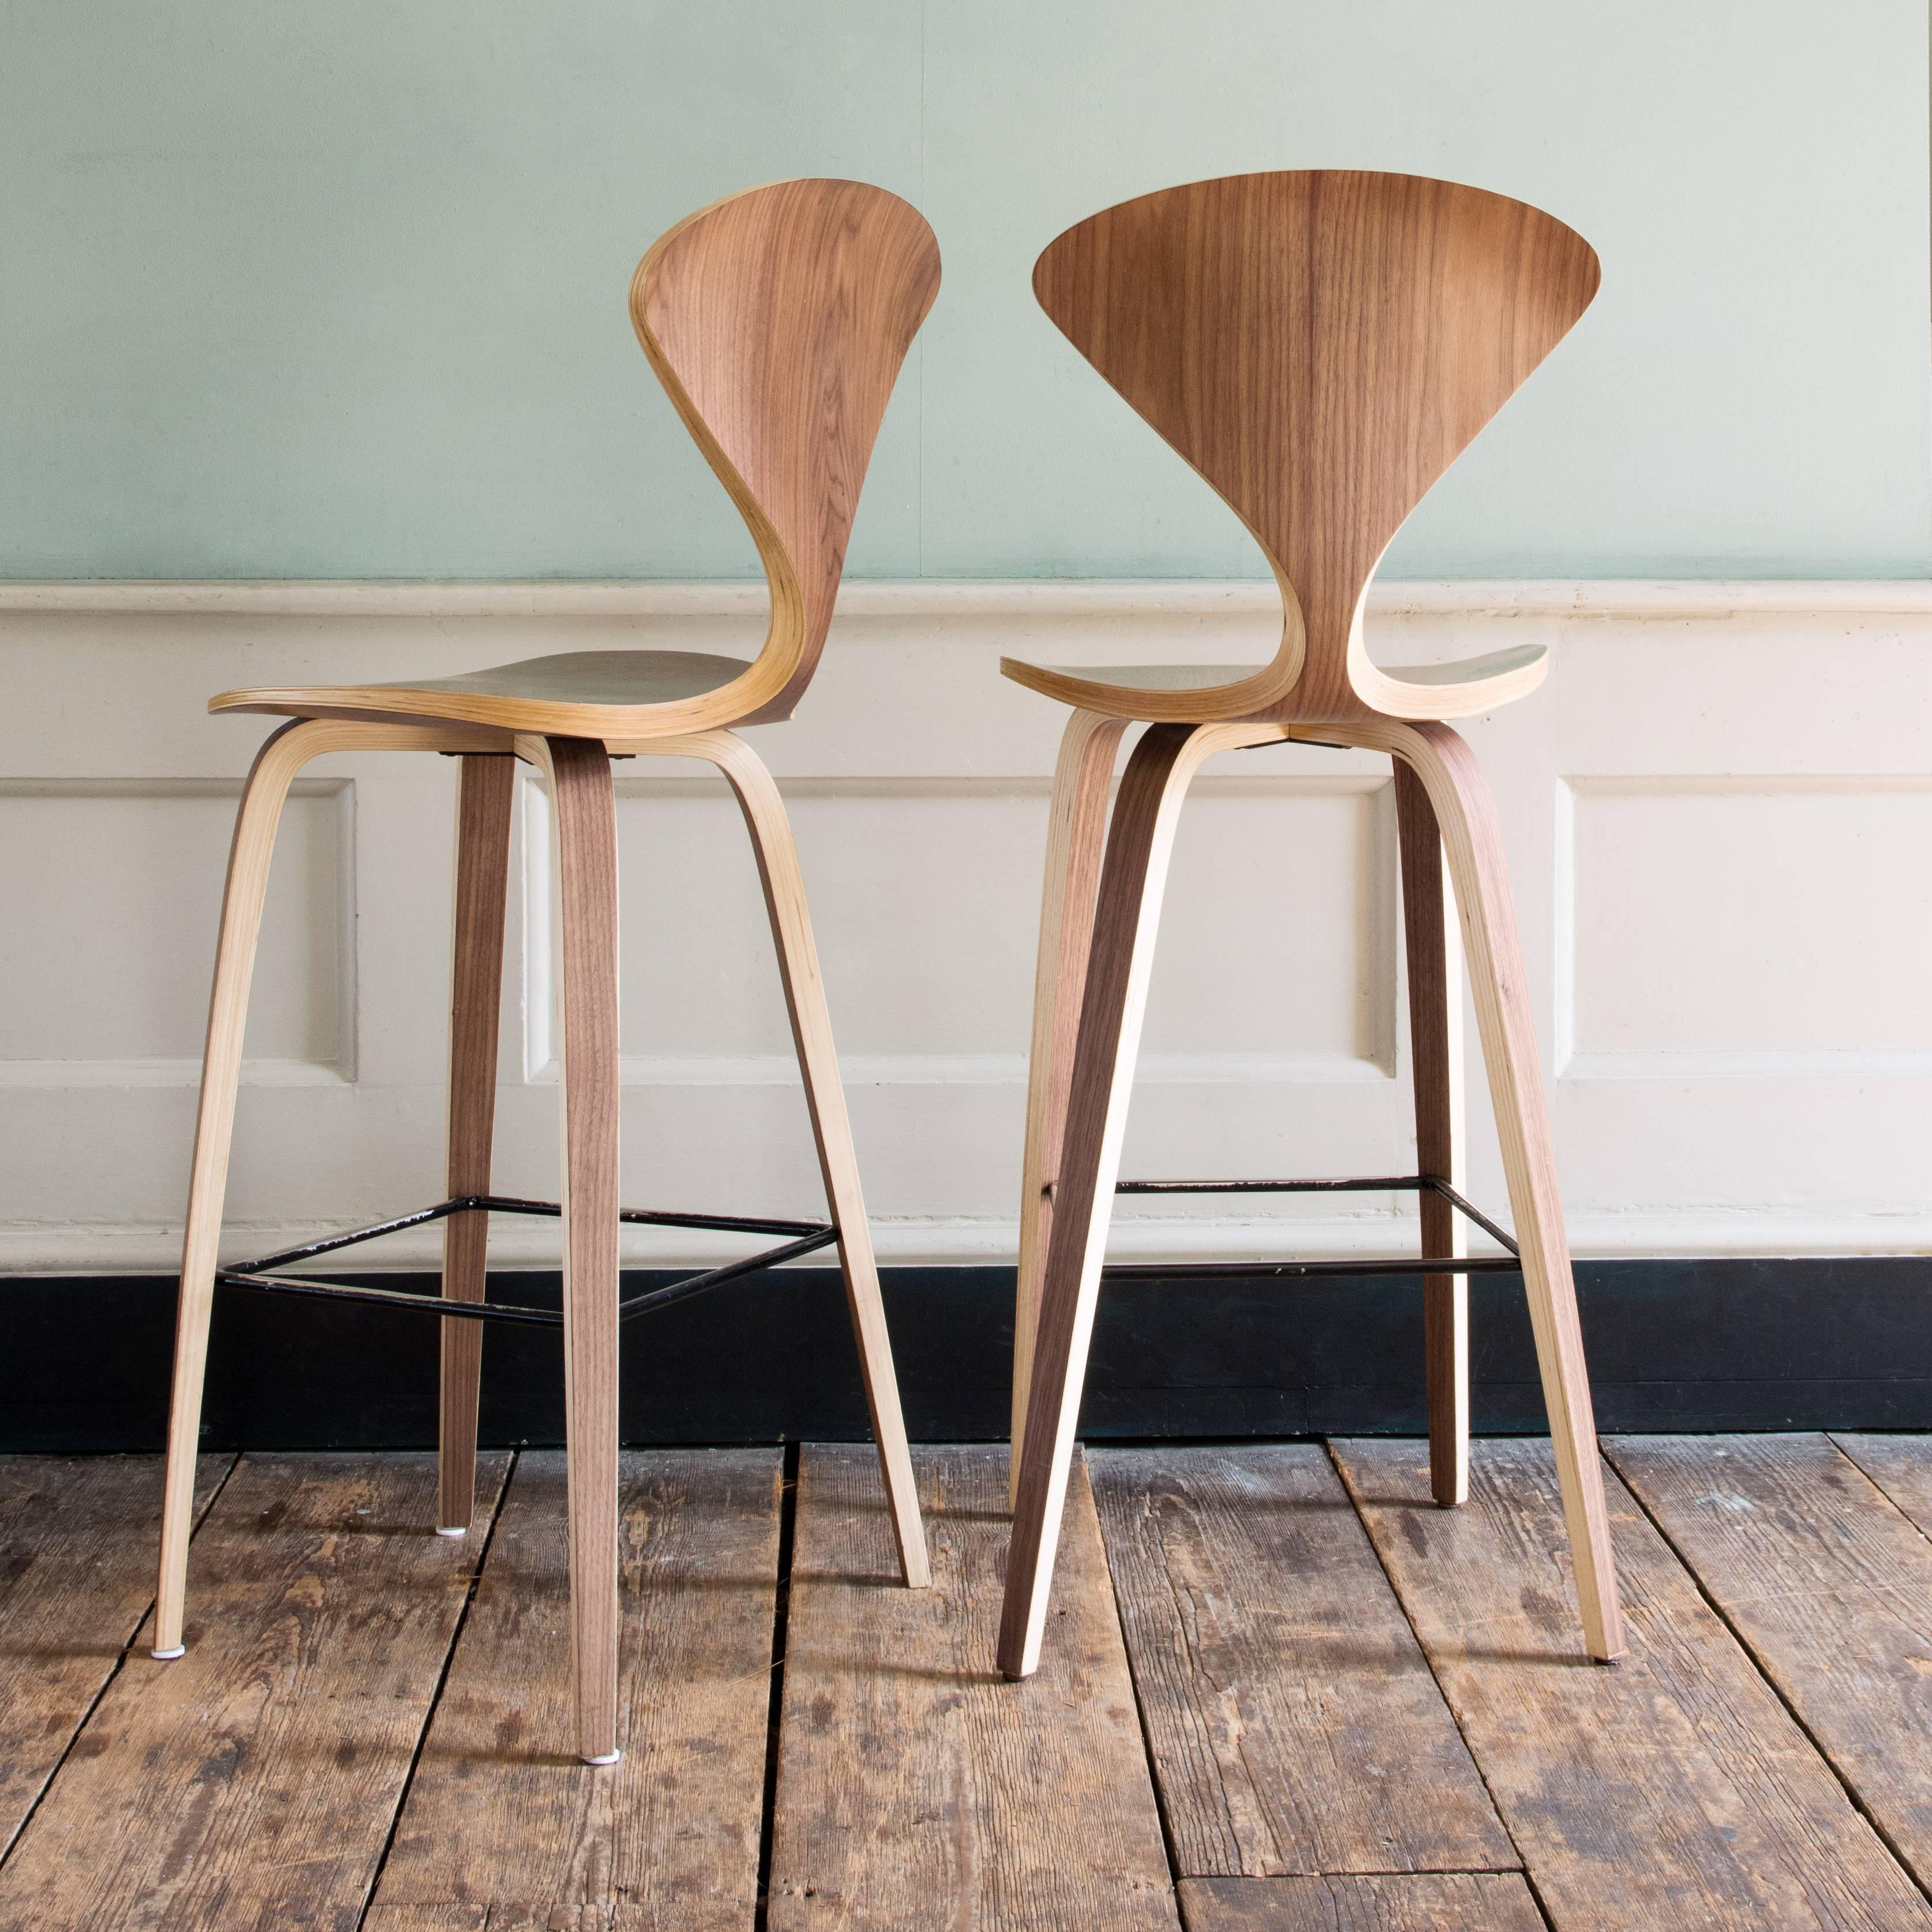 Bentwood barstools, veneered in walnut. 11 available.

Dimensions: 102.5cm (40¼